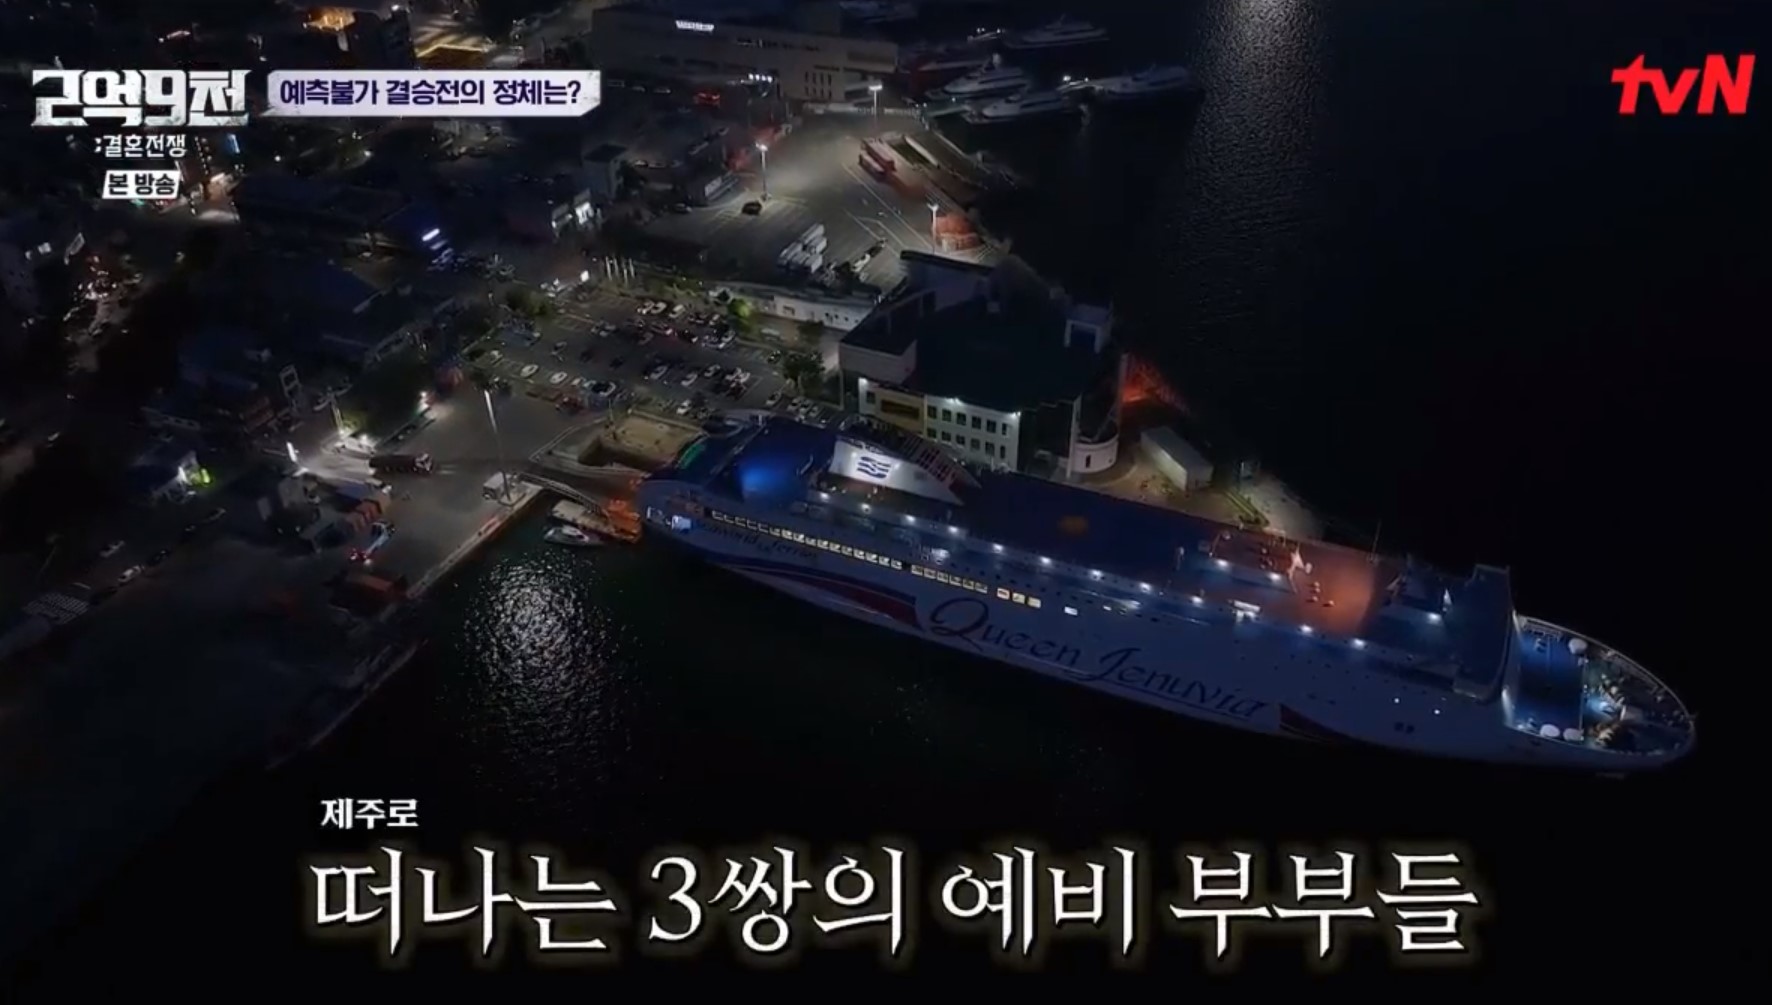 290 Million KRW : Marriage war&#44; episode 8&#44; the cruise ship waiting to leave for Jeju Island.